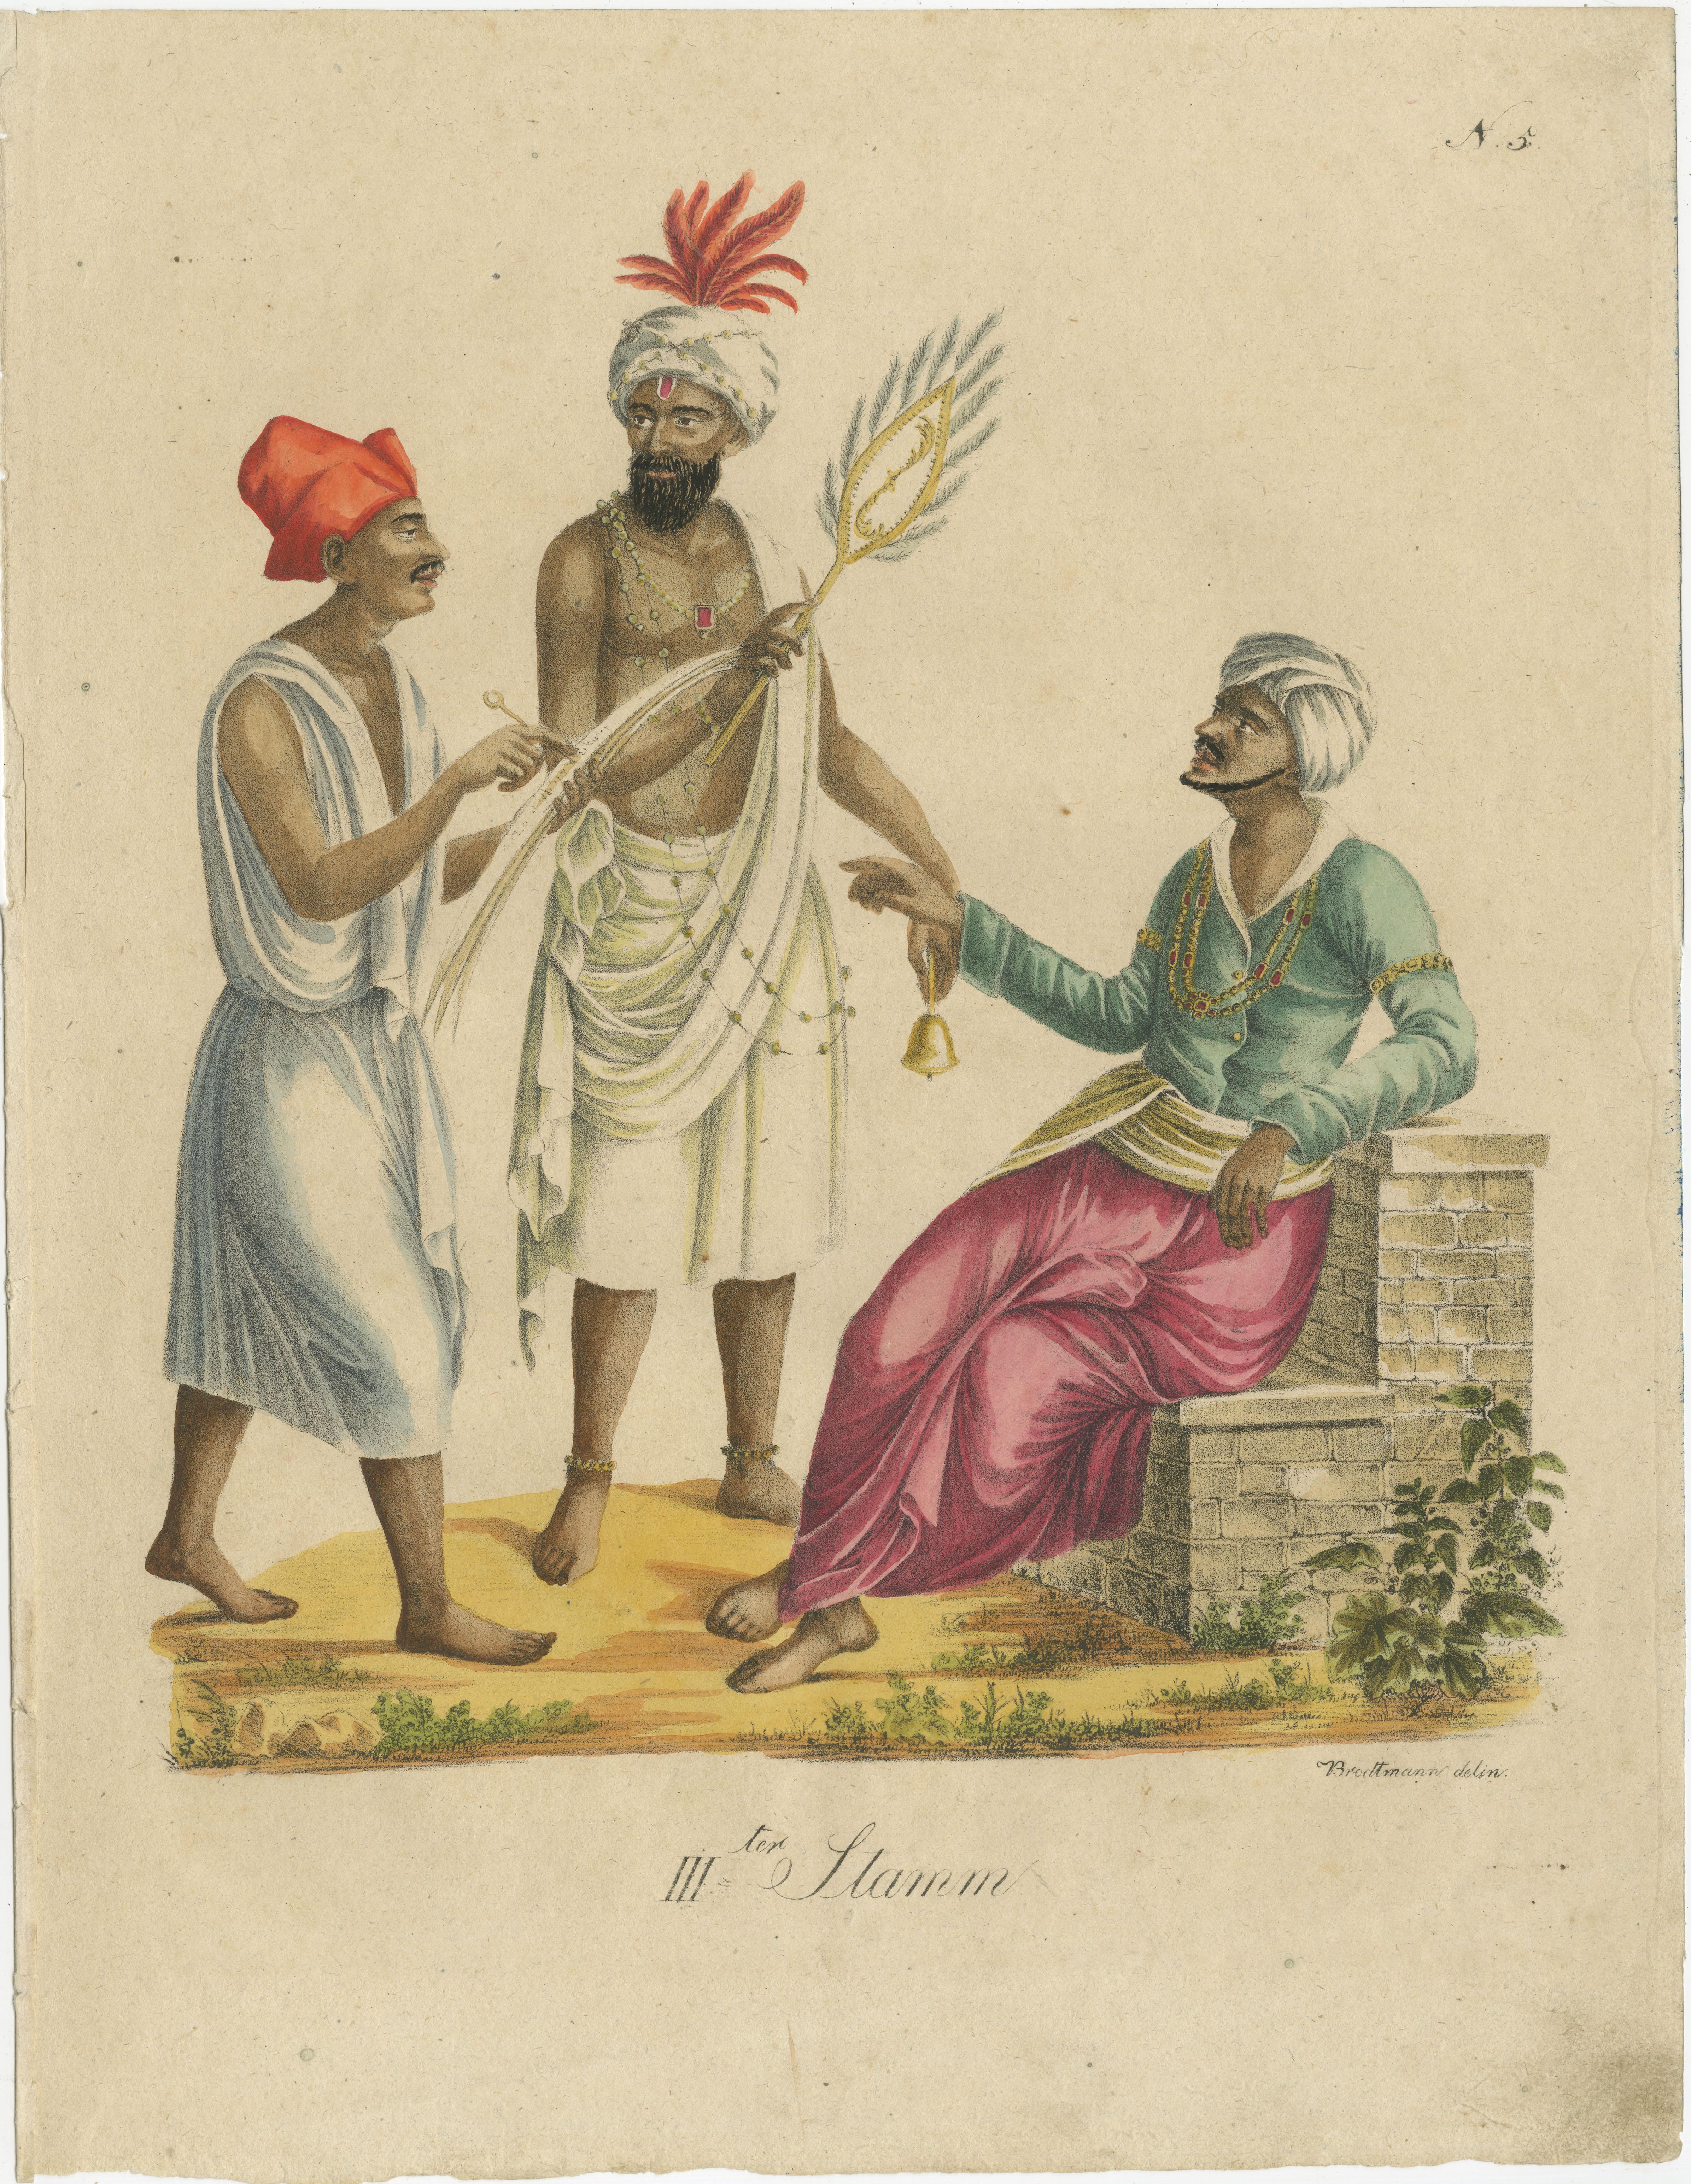 Antique print titled 'IIIter Stamm'. Lithograph of men from India. This print originates from 'Naturhistorische Bilder-Galerie' by Brodtmann. Published circa 1816. 